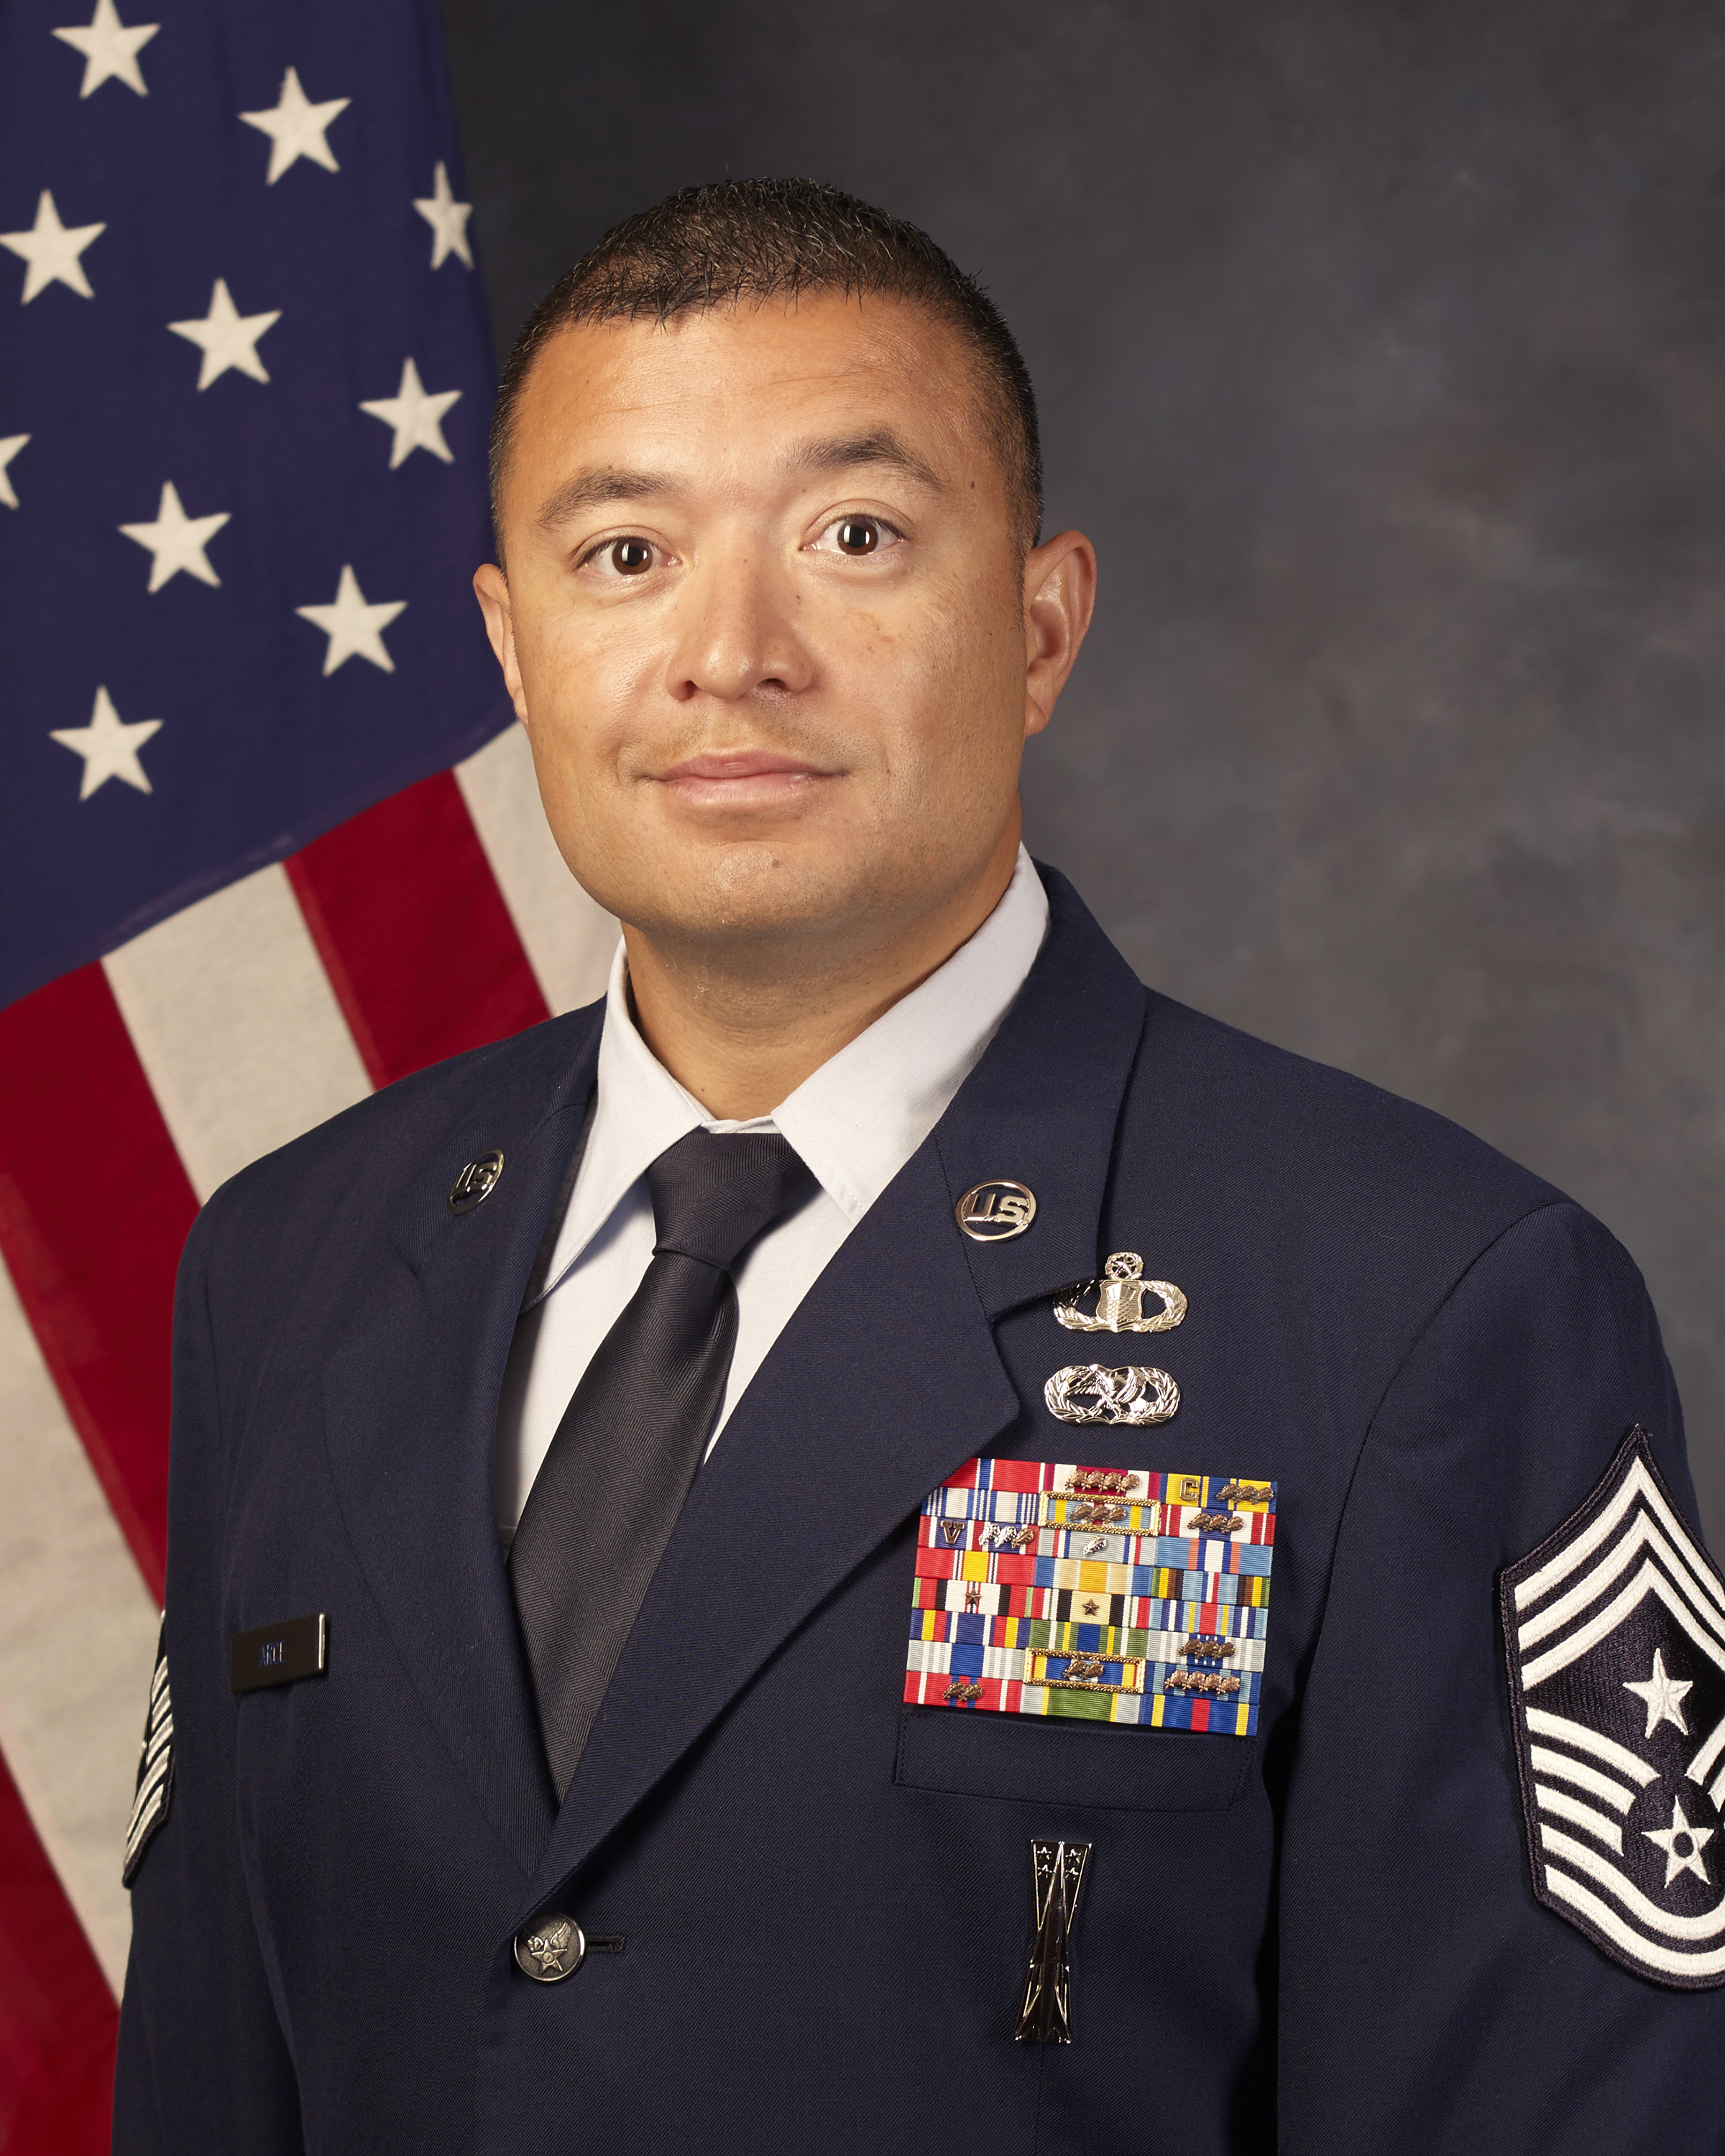 Chief Master Sgt. Joseph Arce official photo with American flag background